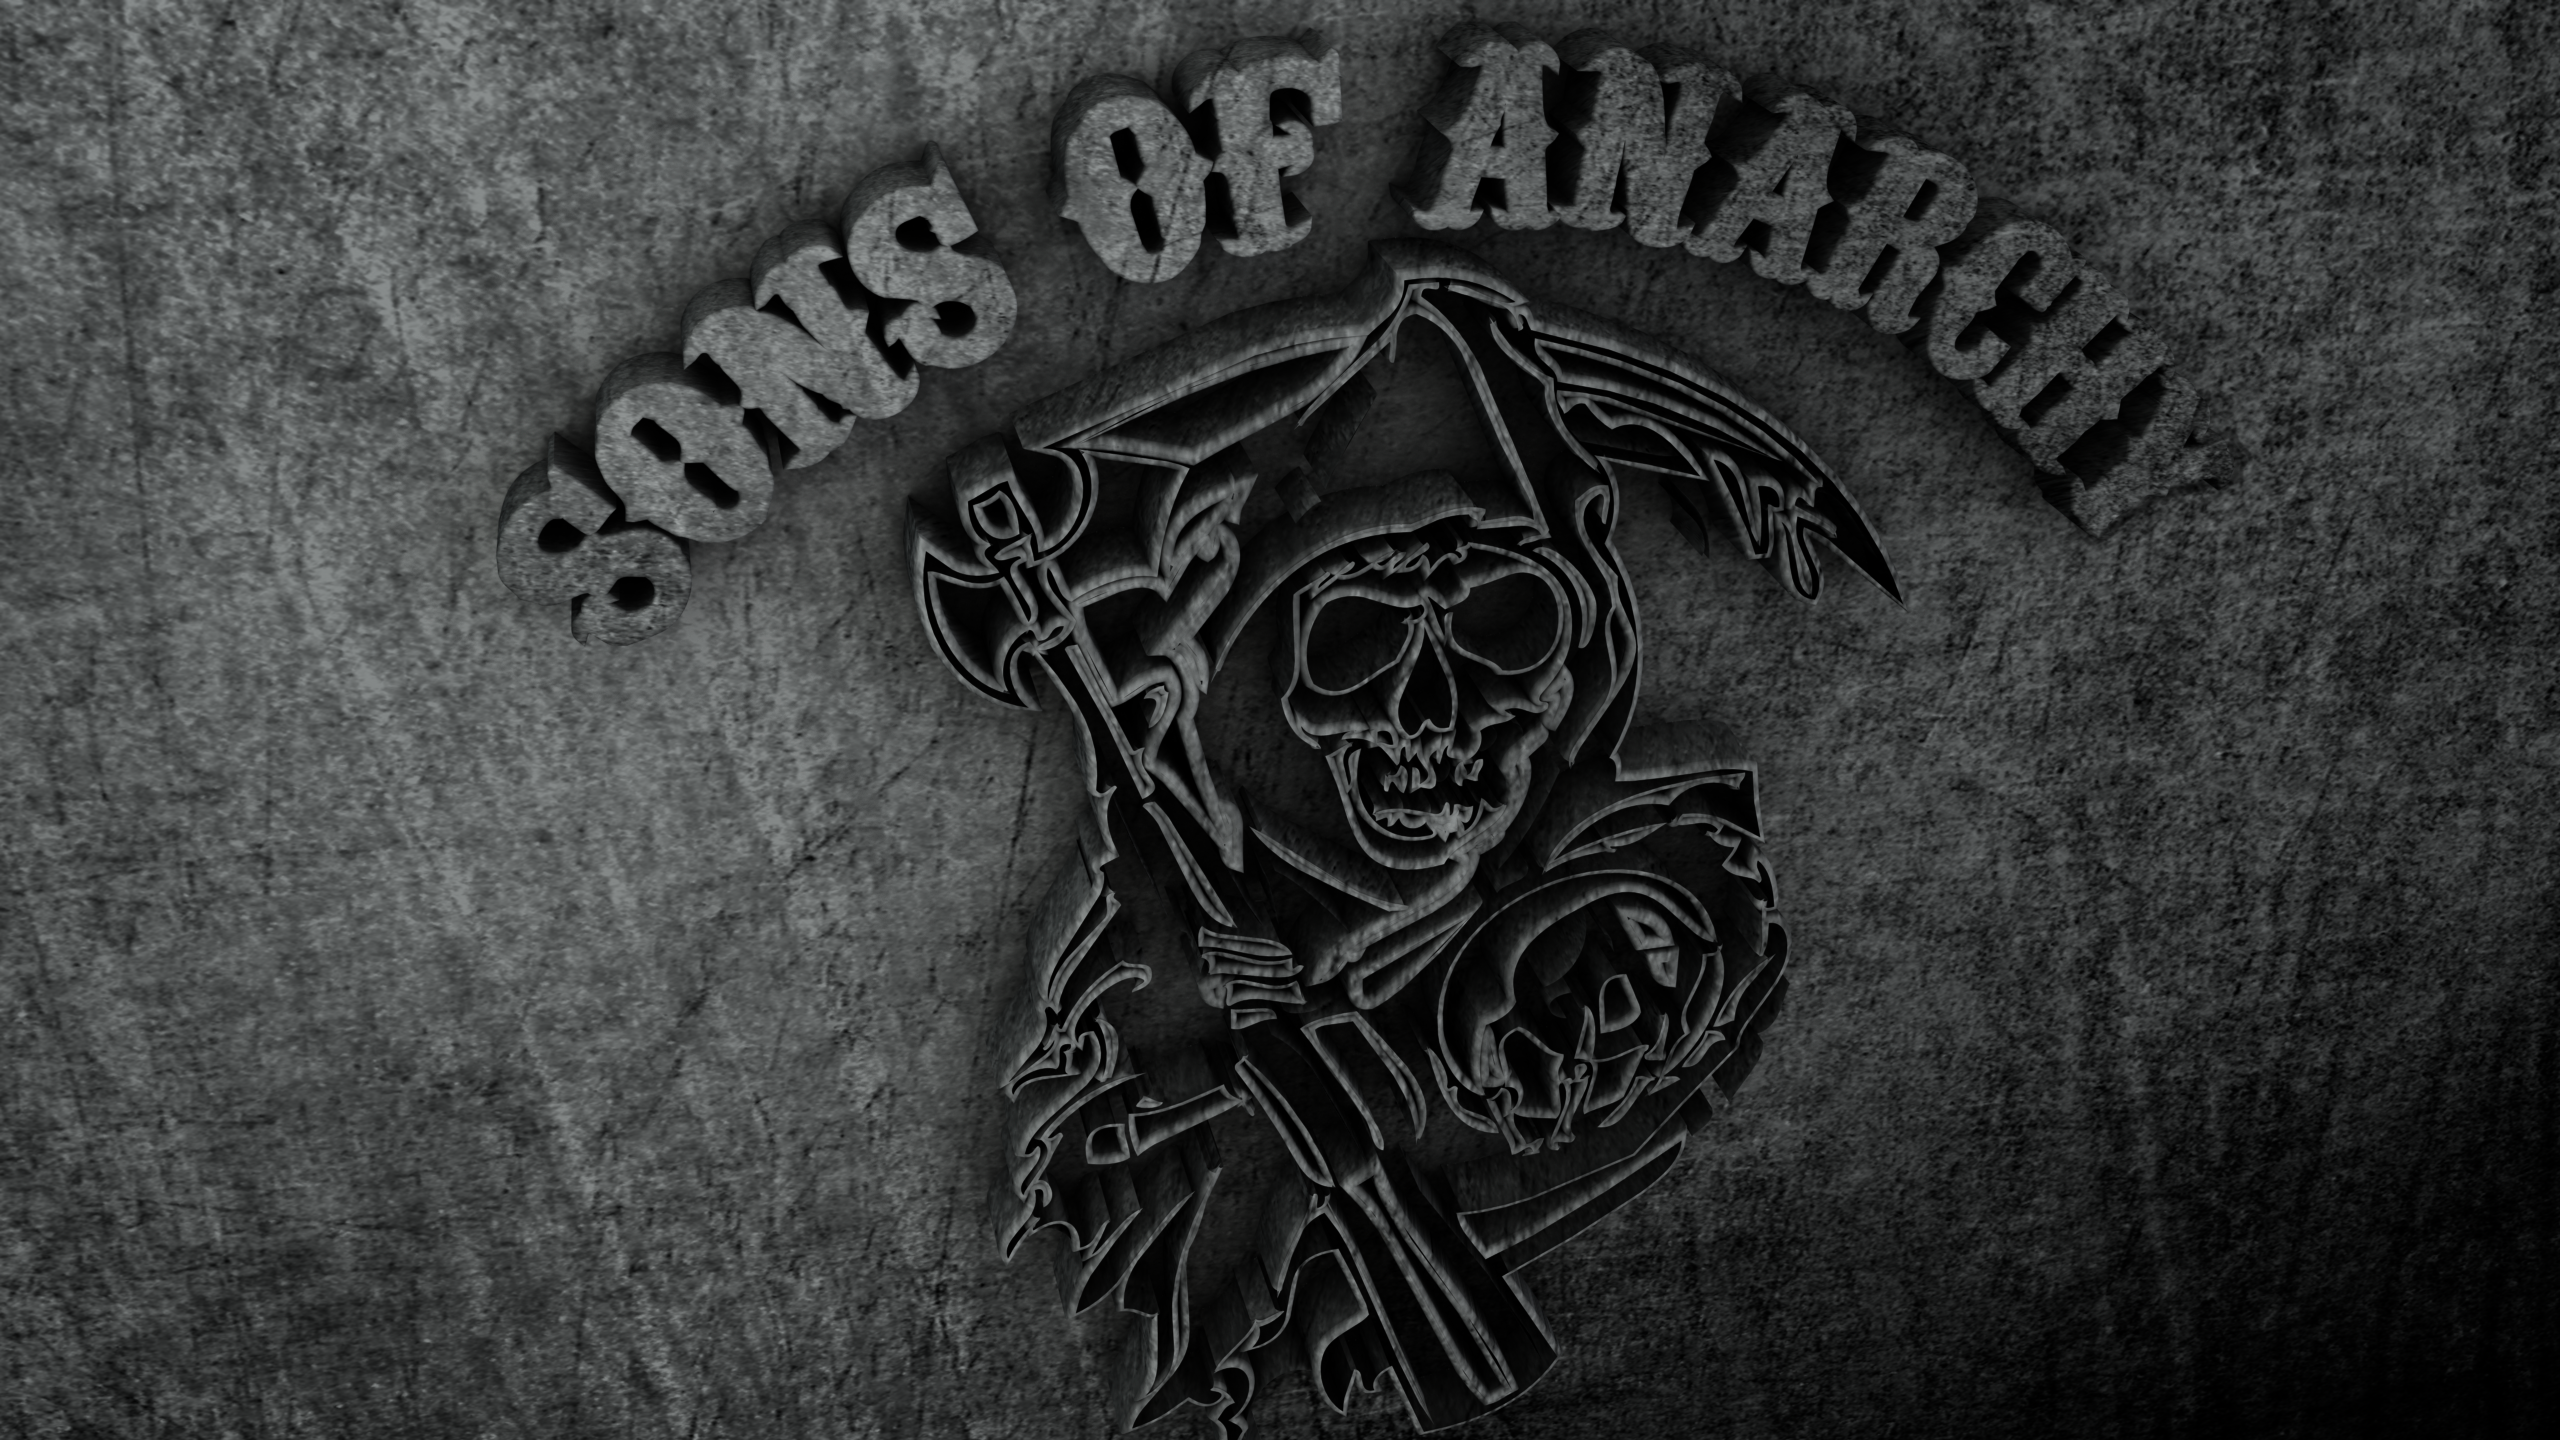 Sons of Anarchy wallpaper   1054163